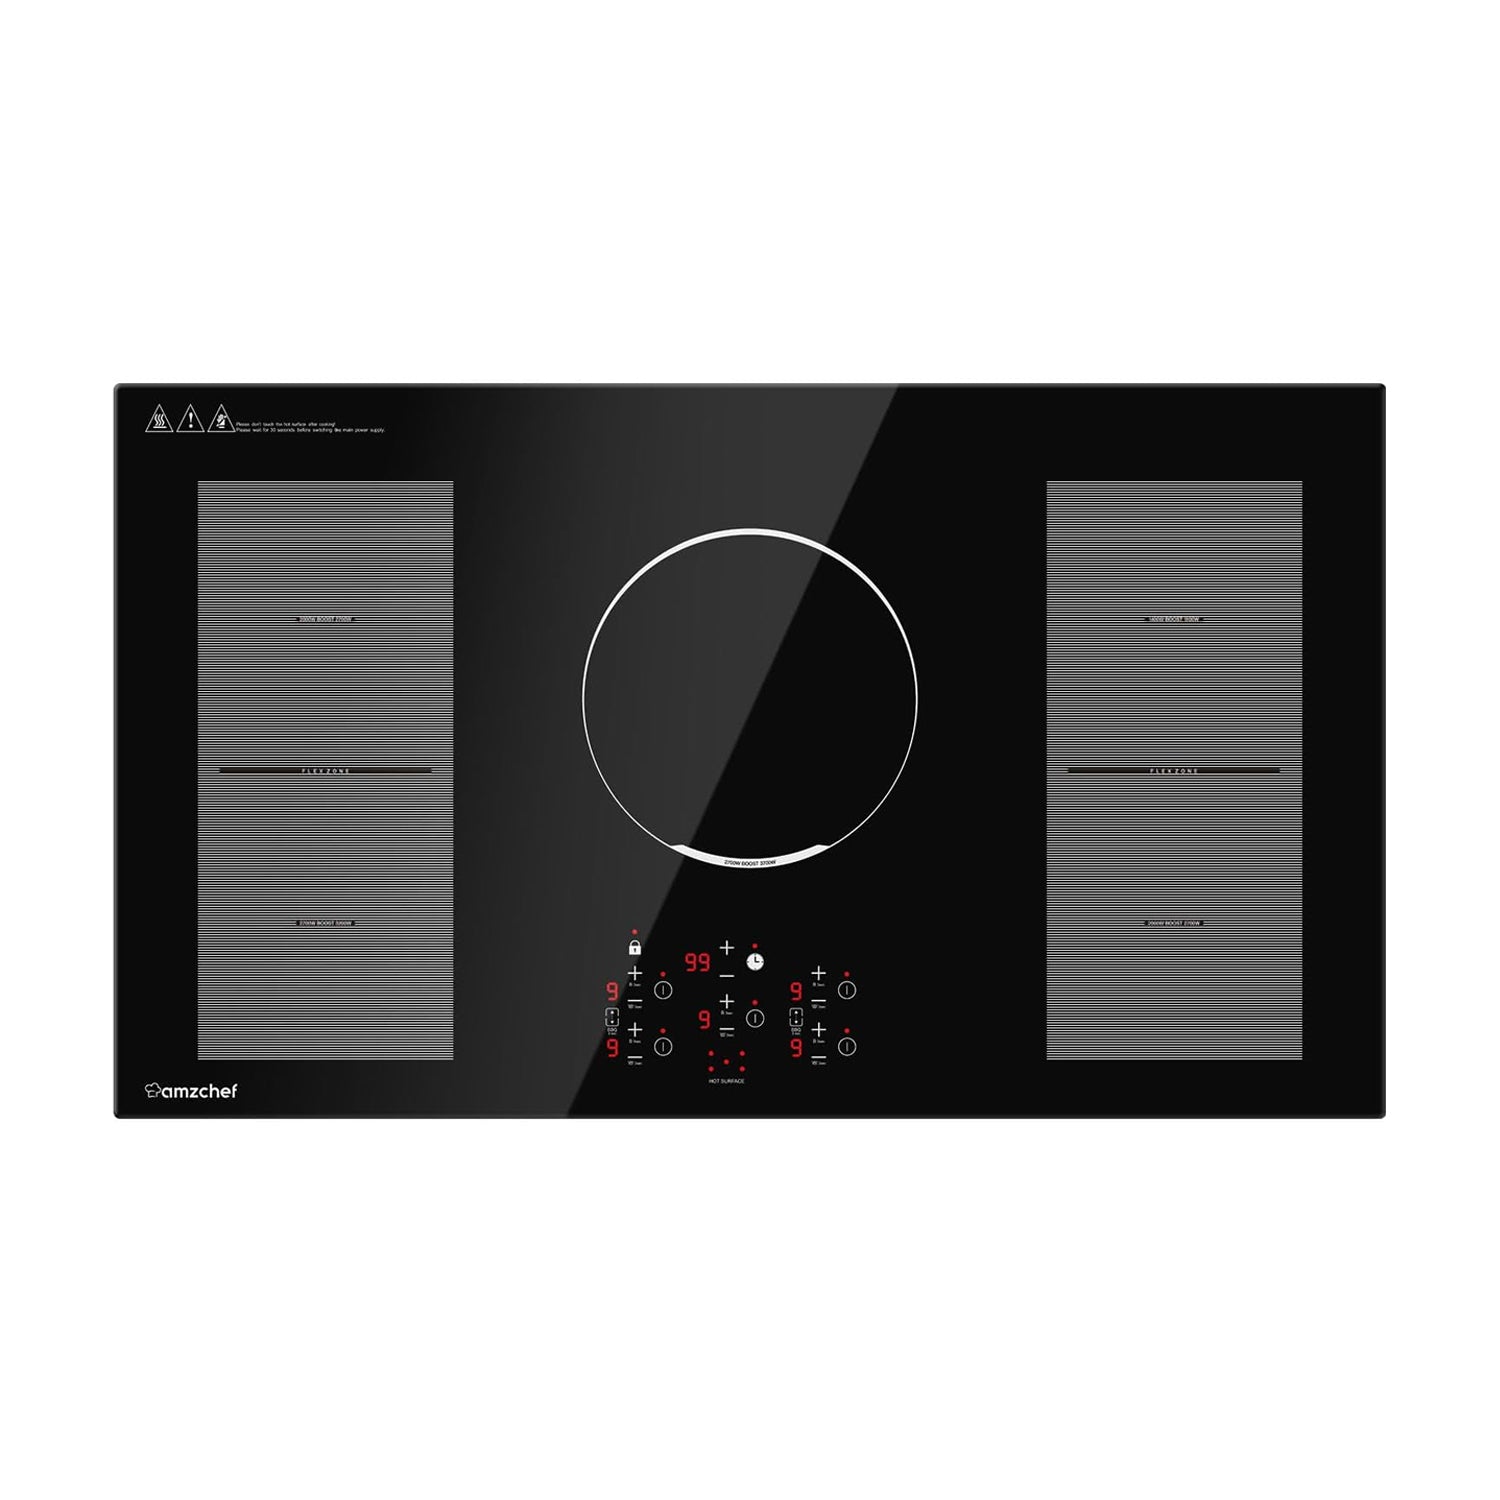 COOKTRON 1800W 120V Portable Double Burner Electric Induction Cooktop w/Knobs